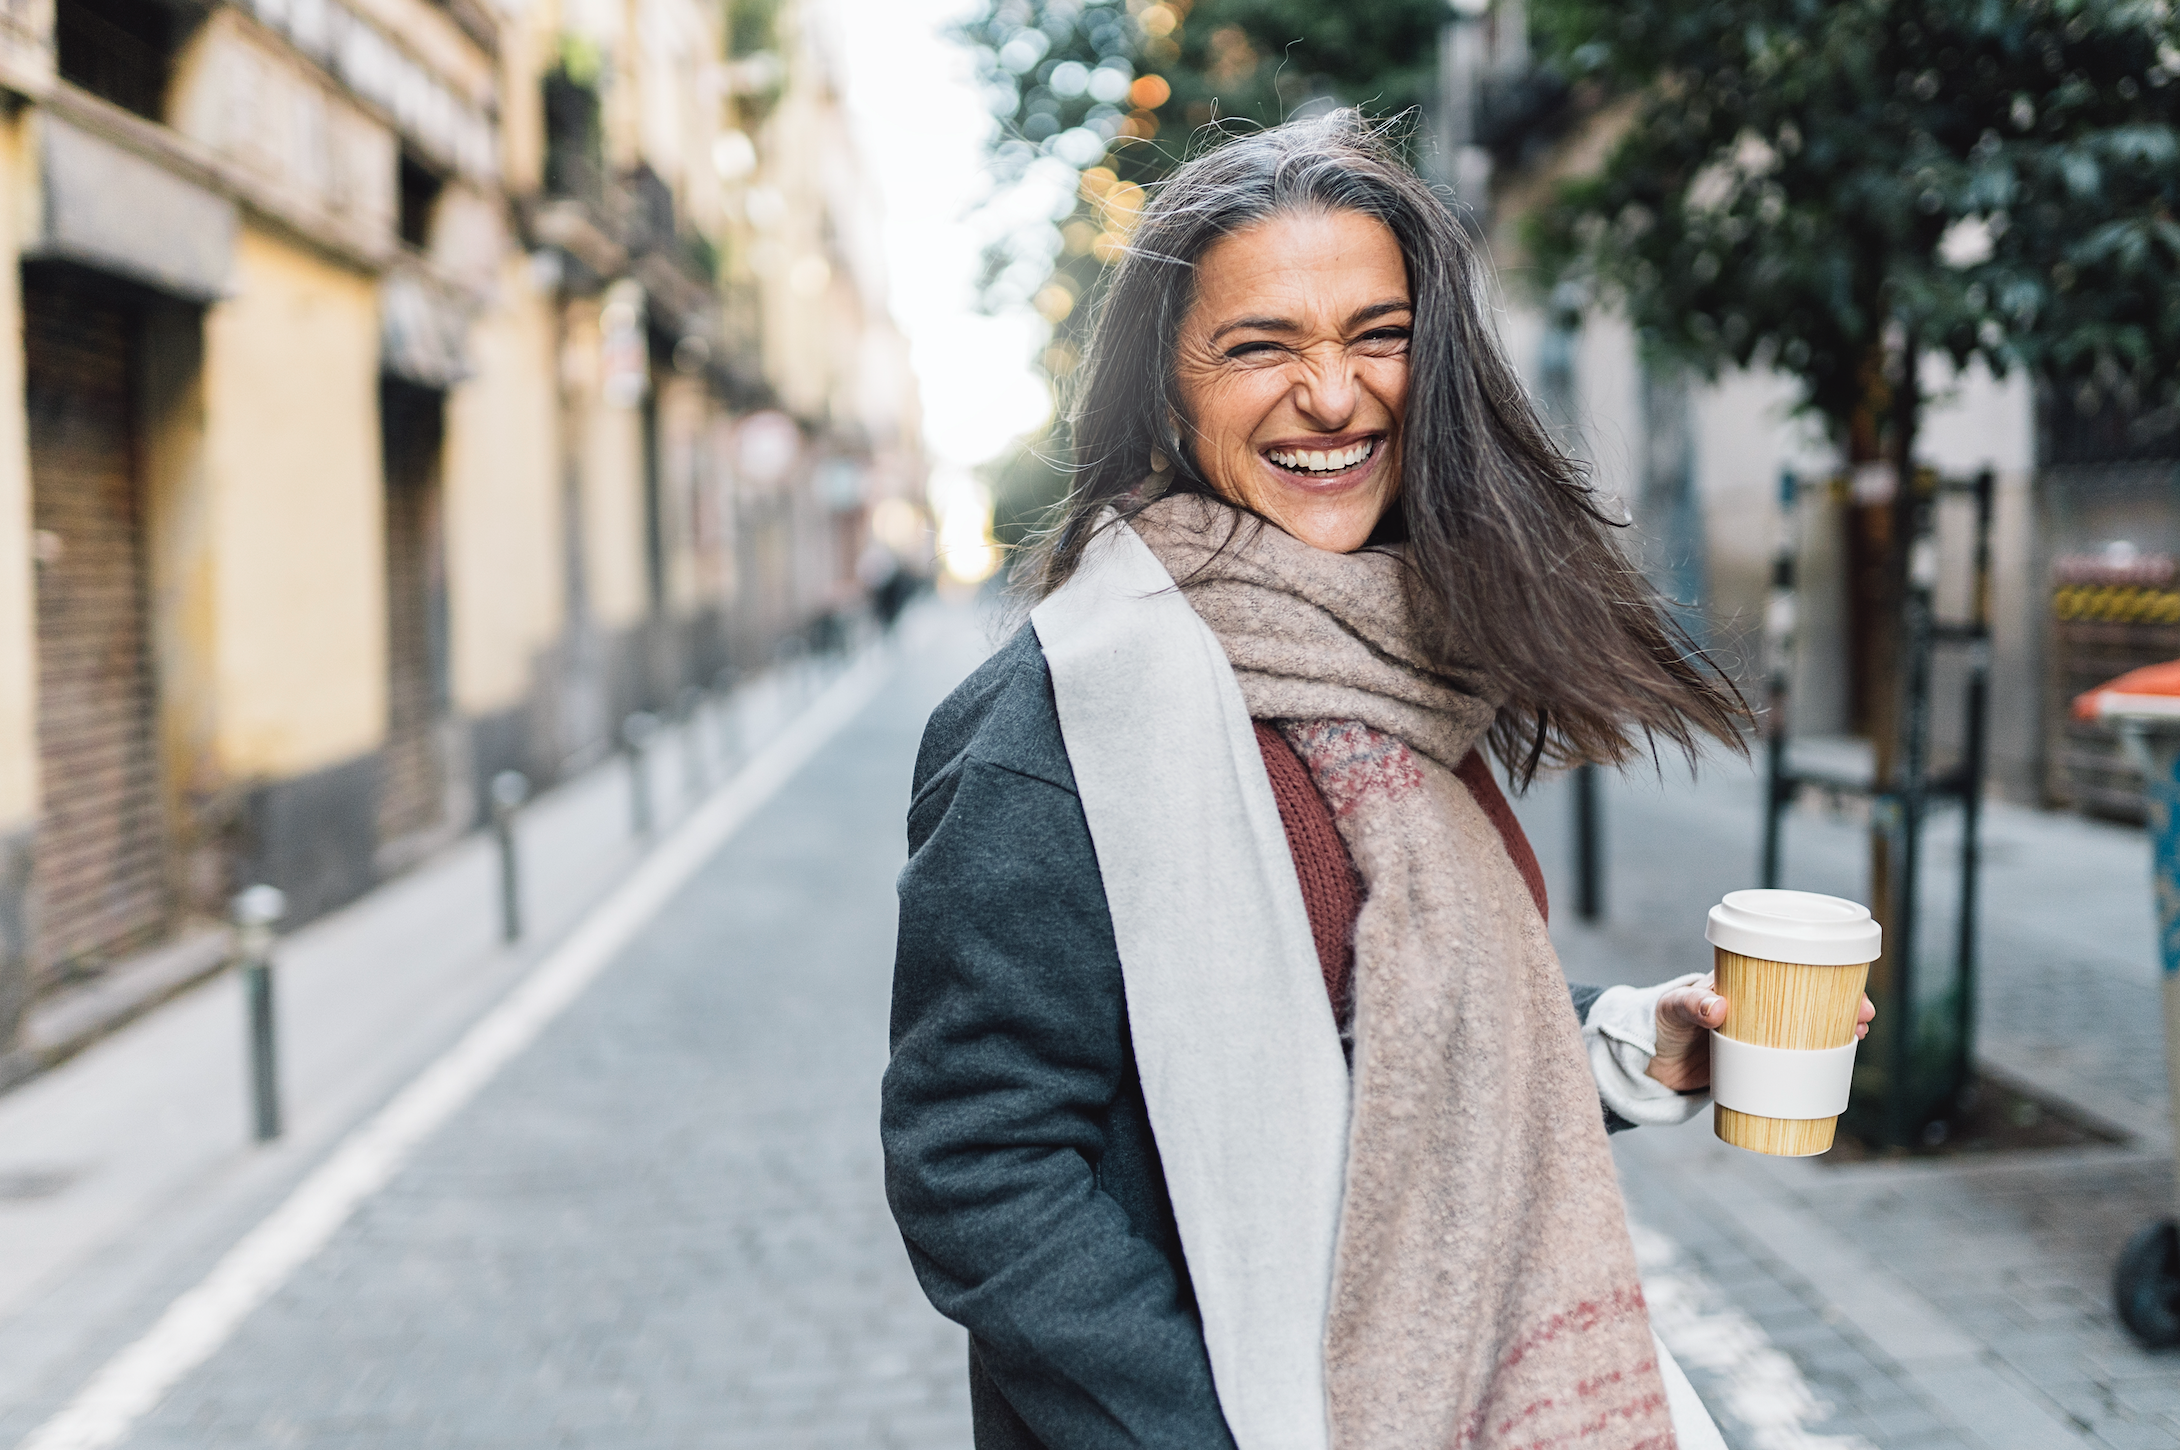 Woman in jacket and scarf, smiling outside and holding coffee cup